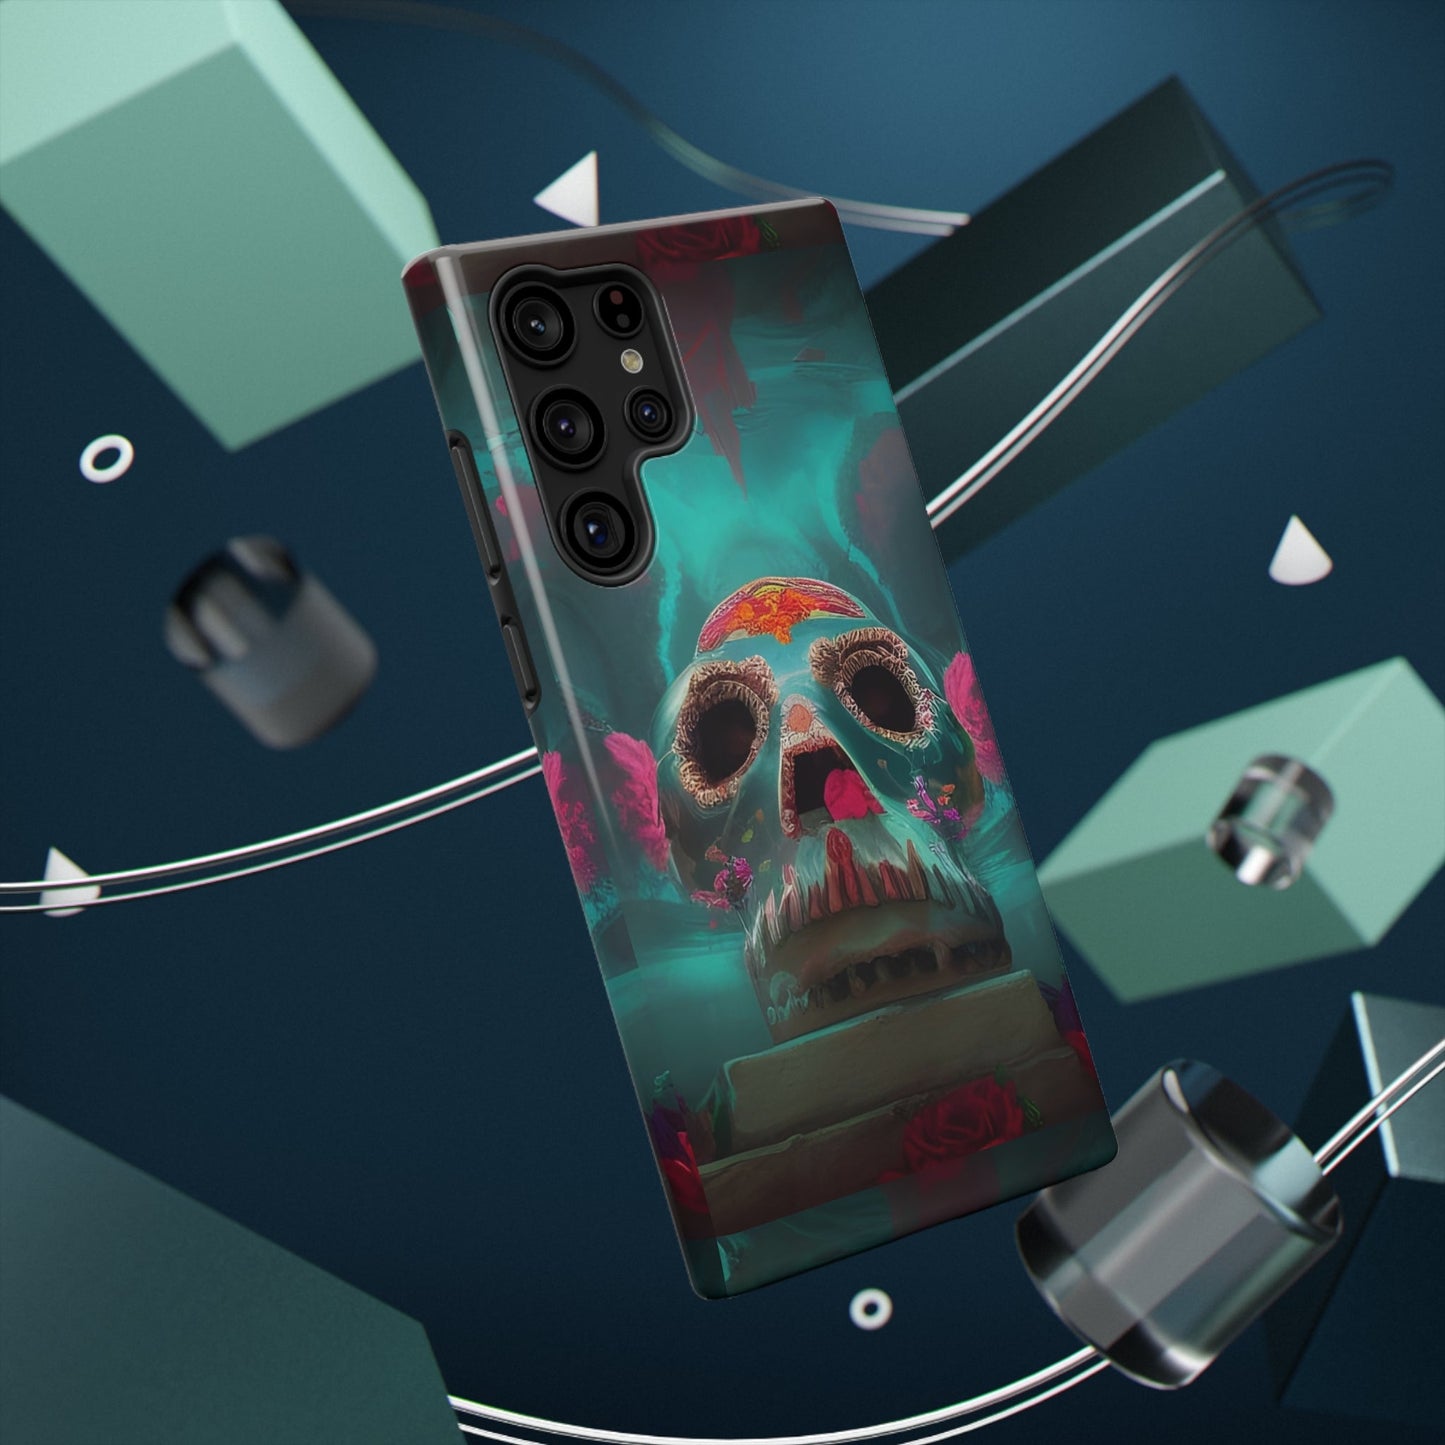 Happy Cinco de mayo skull on a pedestal Impact-Resistant Cases for iPhone and Samsung-Shalav5